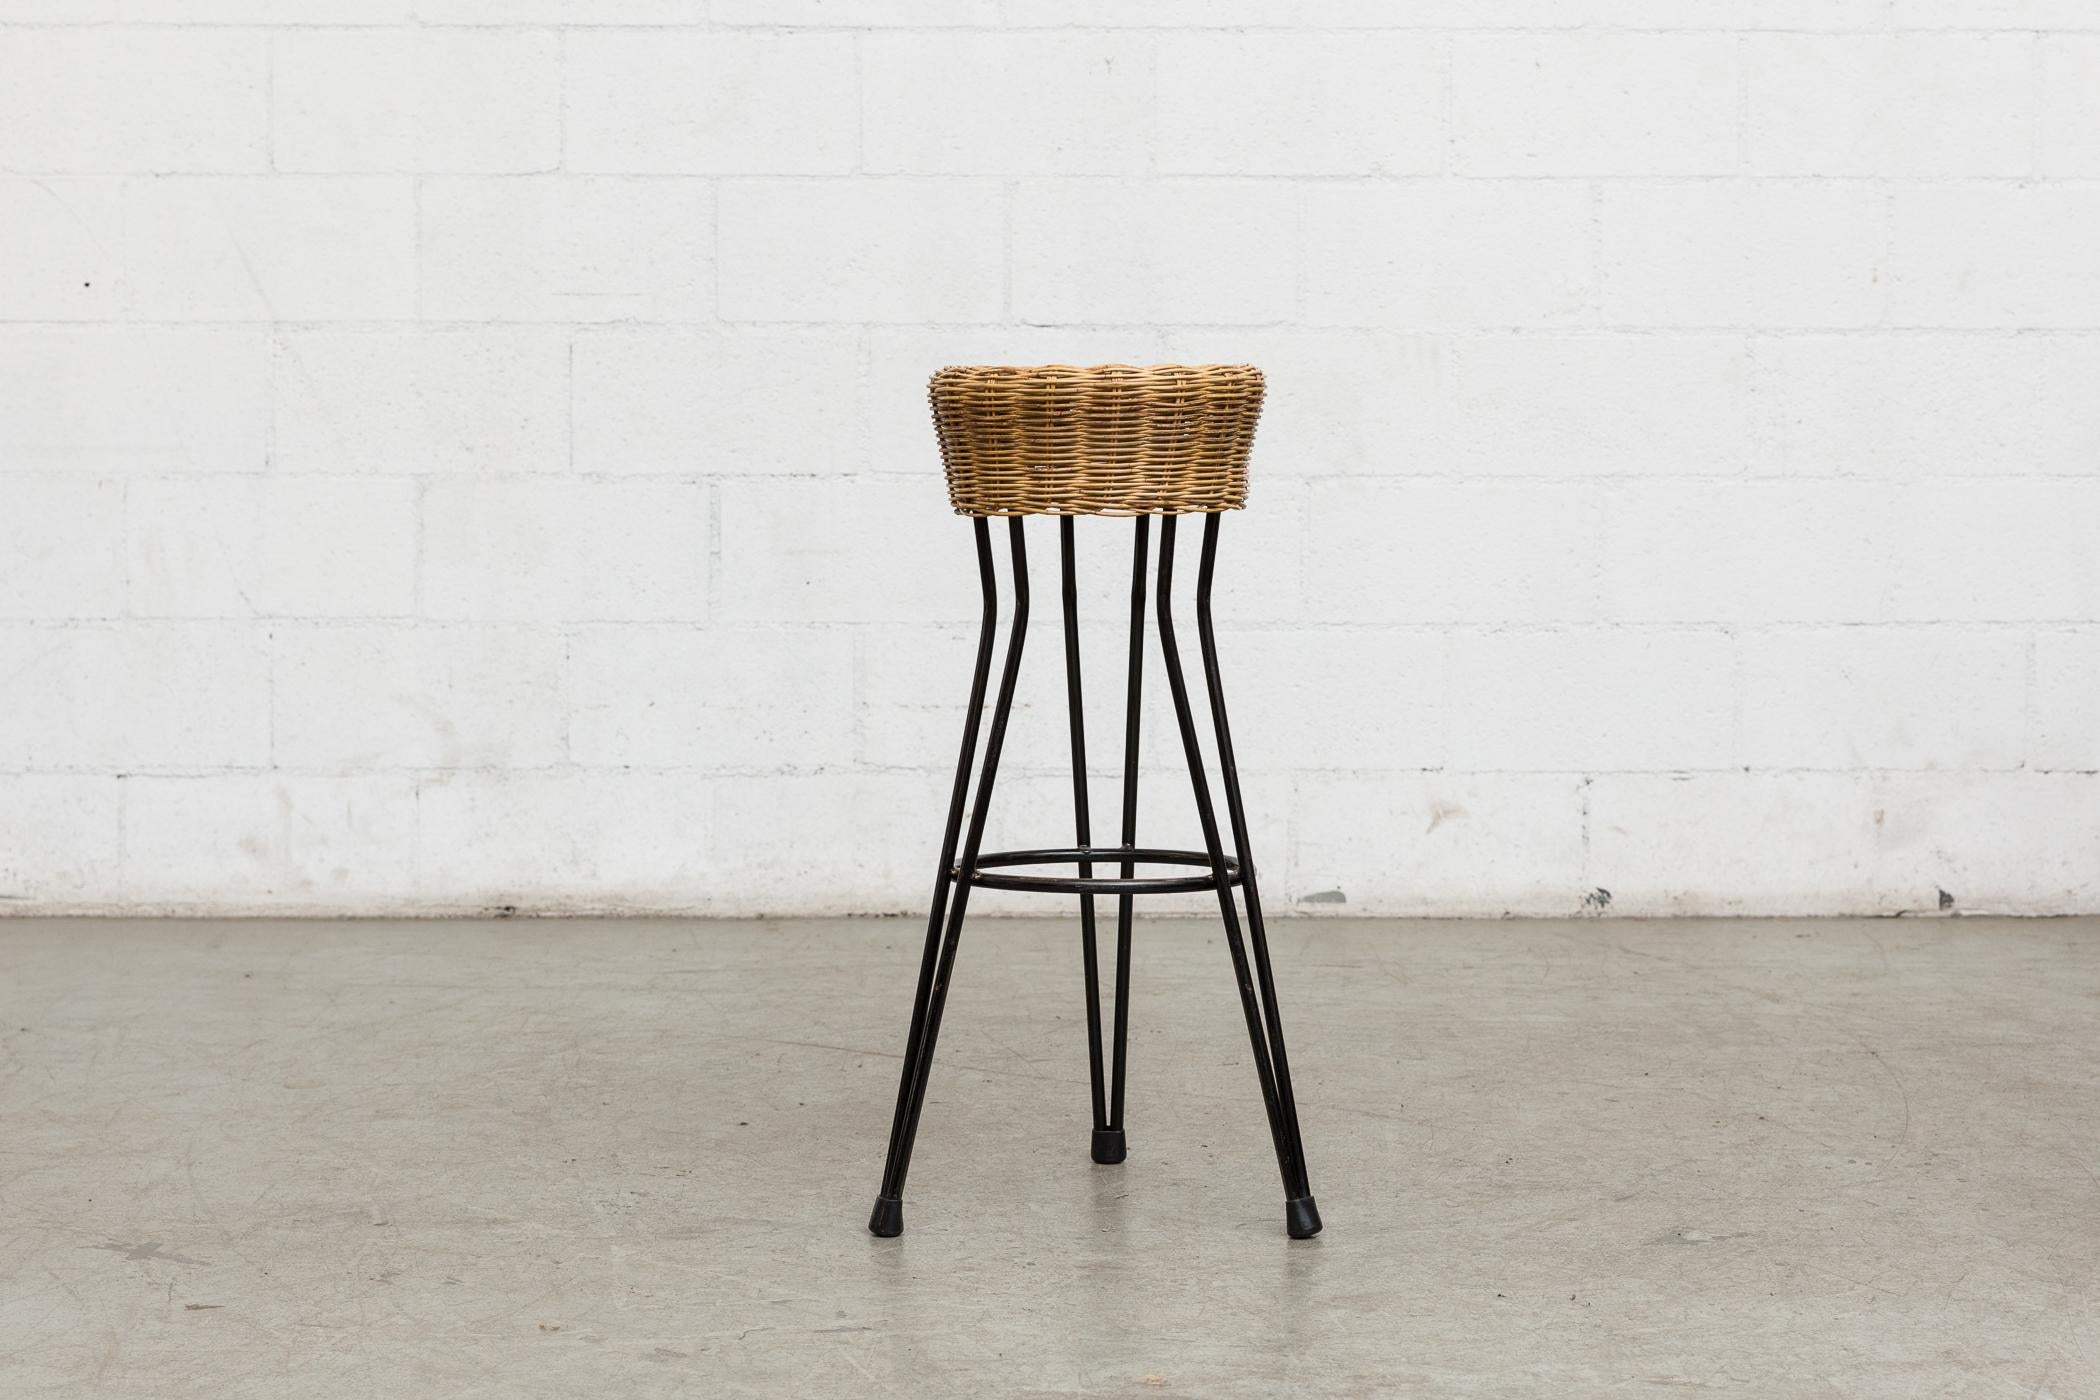 Set of 3 midcentury bar stools with woven rattan seats and black metal hairpin legs. Good original condition with visible signs of wear consistent with its age and usage. Similar single bar stool also available (LU922412763522).